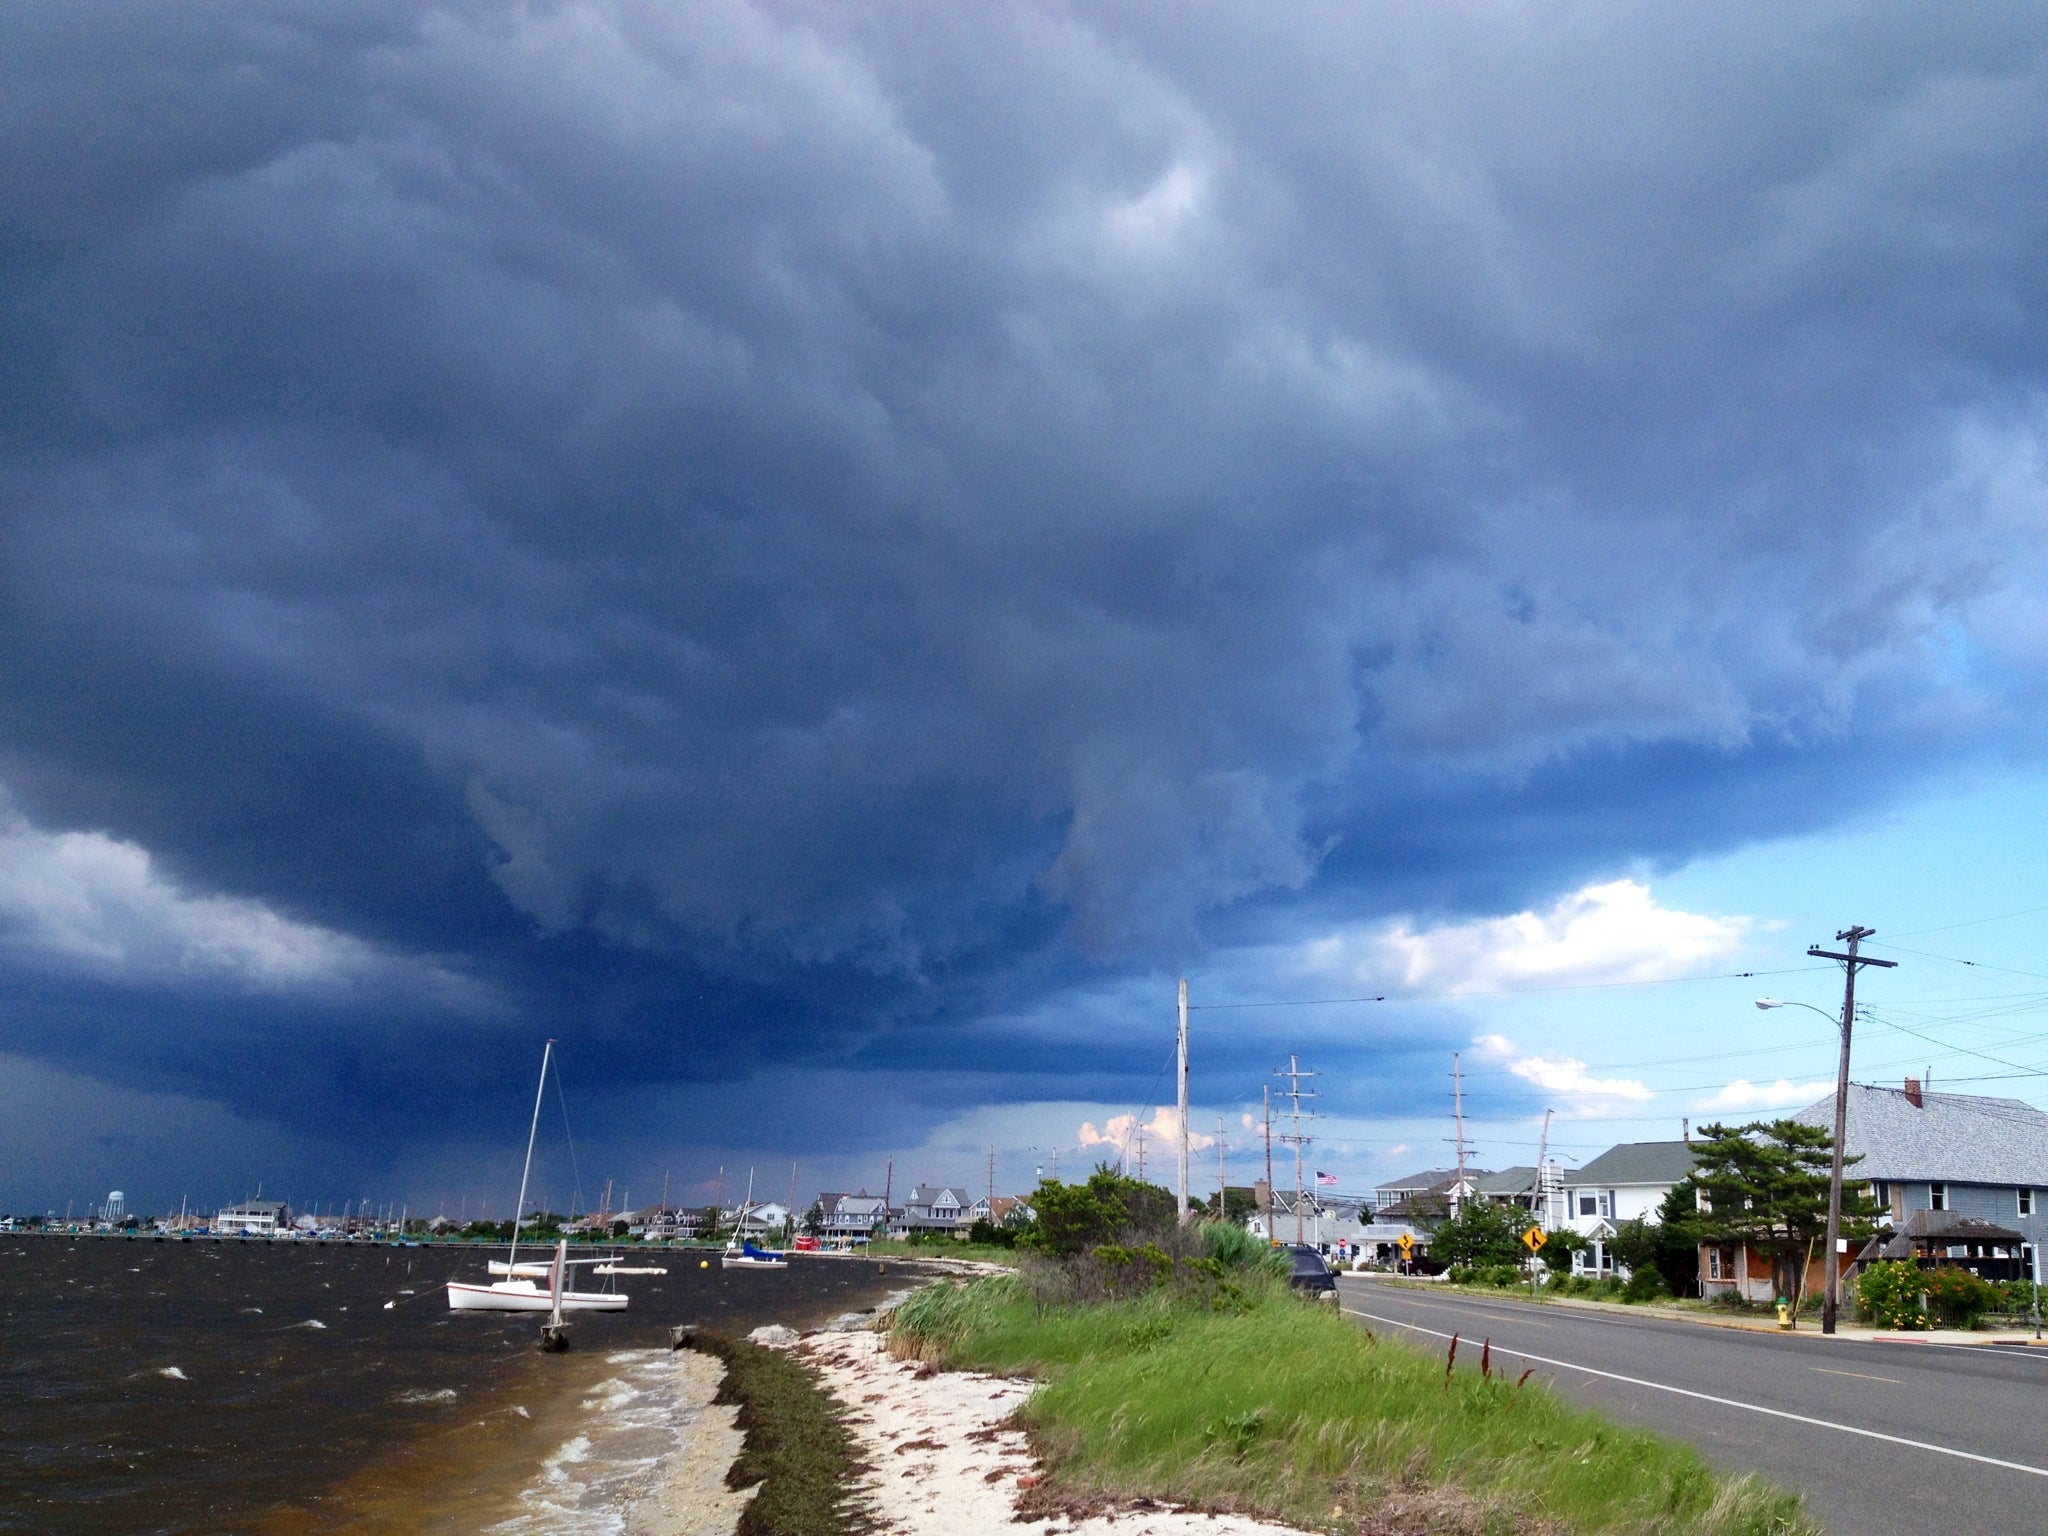  A strong thunderstorm heading over Seaside Park in July 2013. (Photo: Justin Auciello/Jersey Shore Hurricane News) 